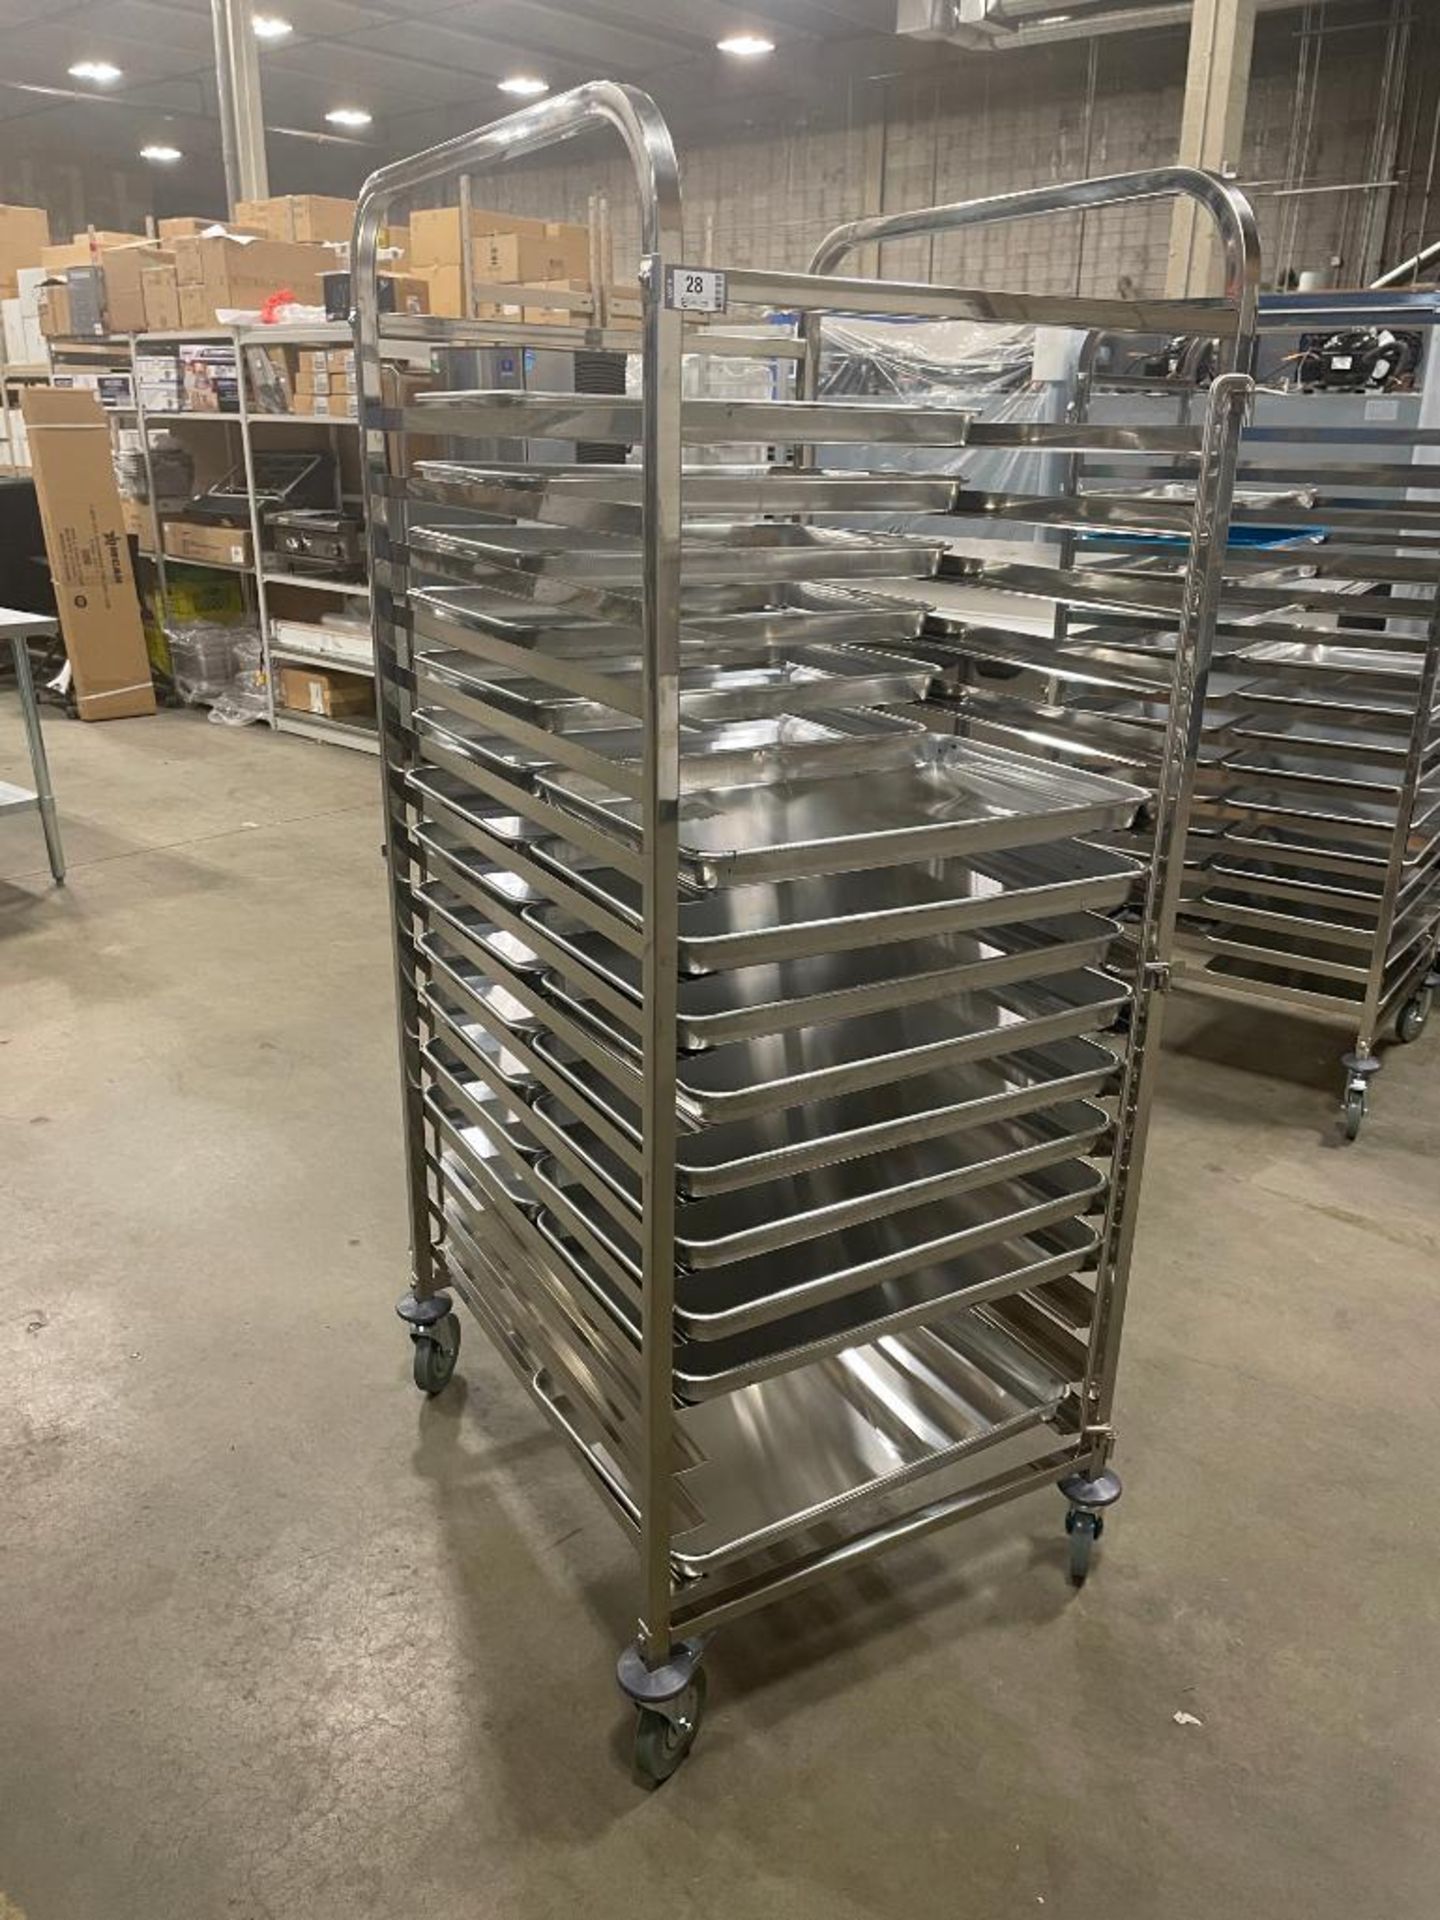 NEW STAINLESS STEEL 16-SLOT OVERSIZED BUN PAN RACK WITH PAN GUARD & (22) PANS - Image 5 of 9